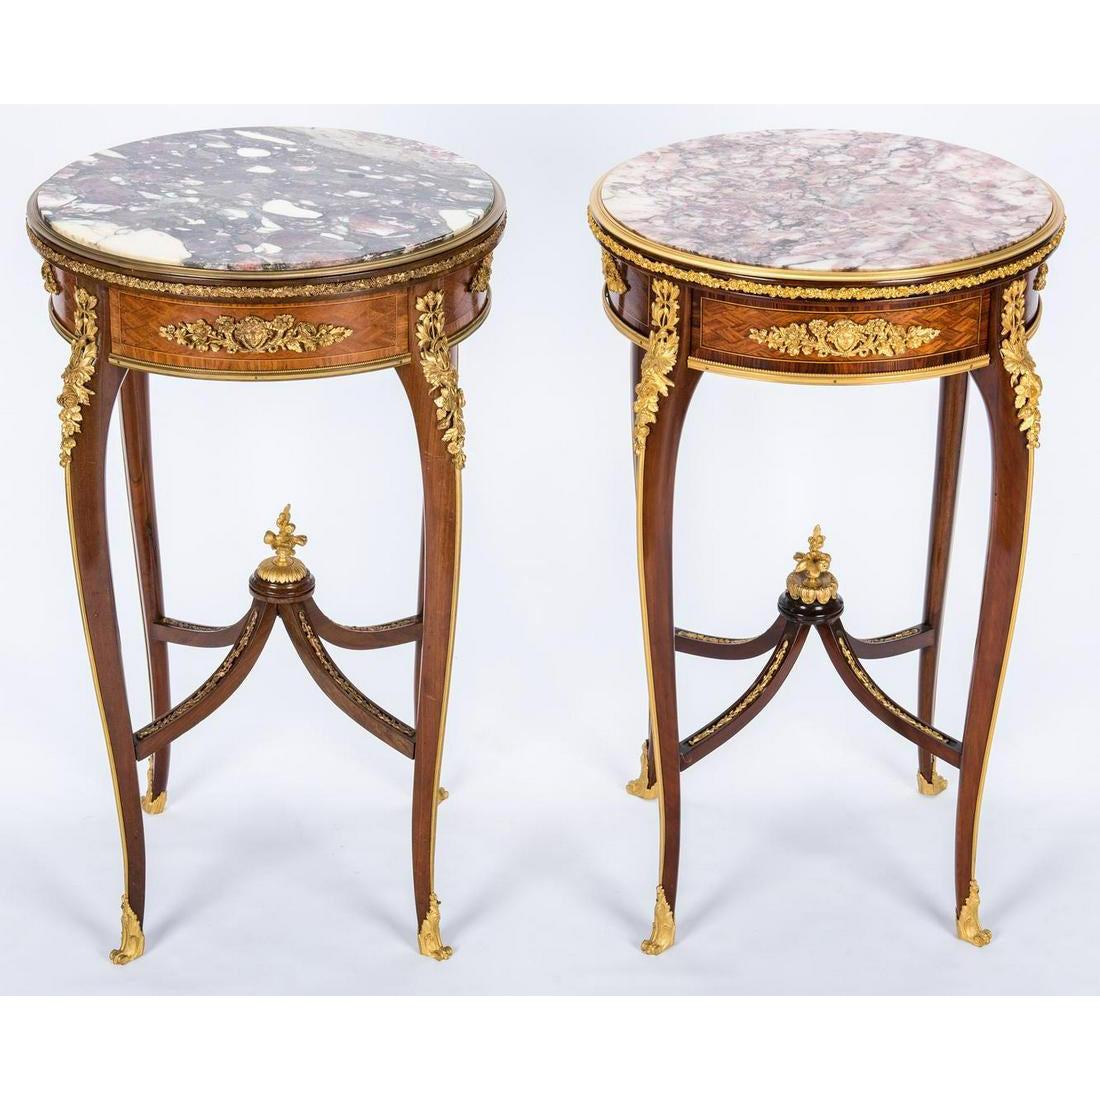 A very fine pair of French 19th-20th century gilt bronze (Ormolu) mounted, mahogany and tulipwood parquetry round gueridon (side) tables with marble top, attributed to François Linke (1855-1946). The inset round brocatelle d'Espagne marble top above